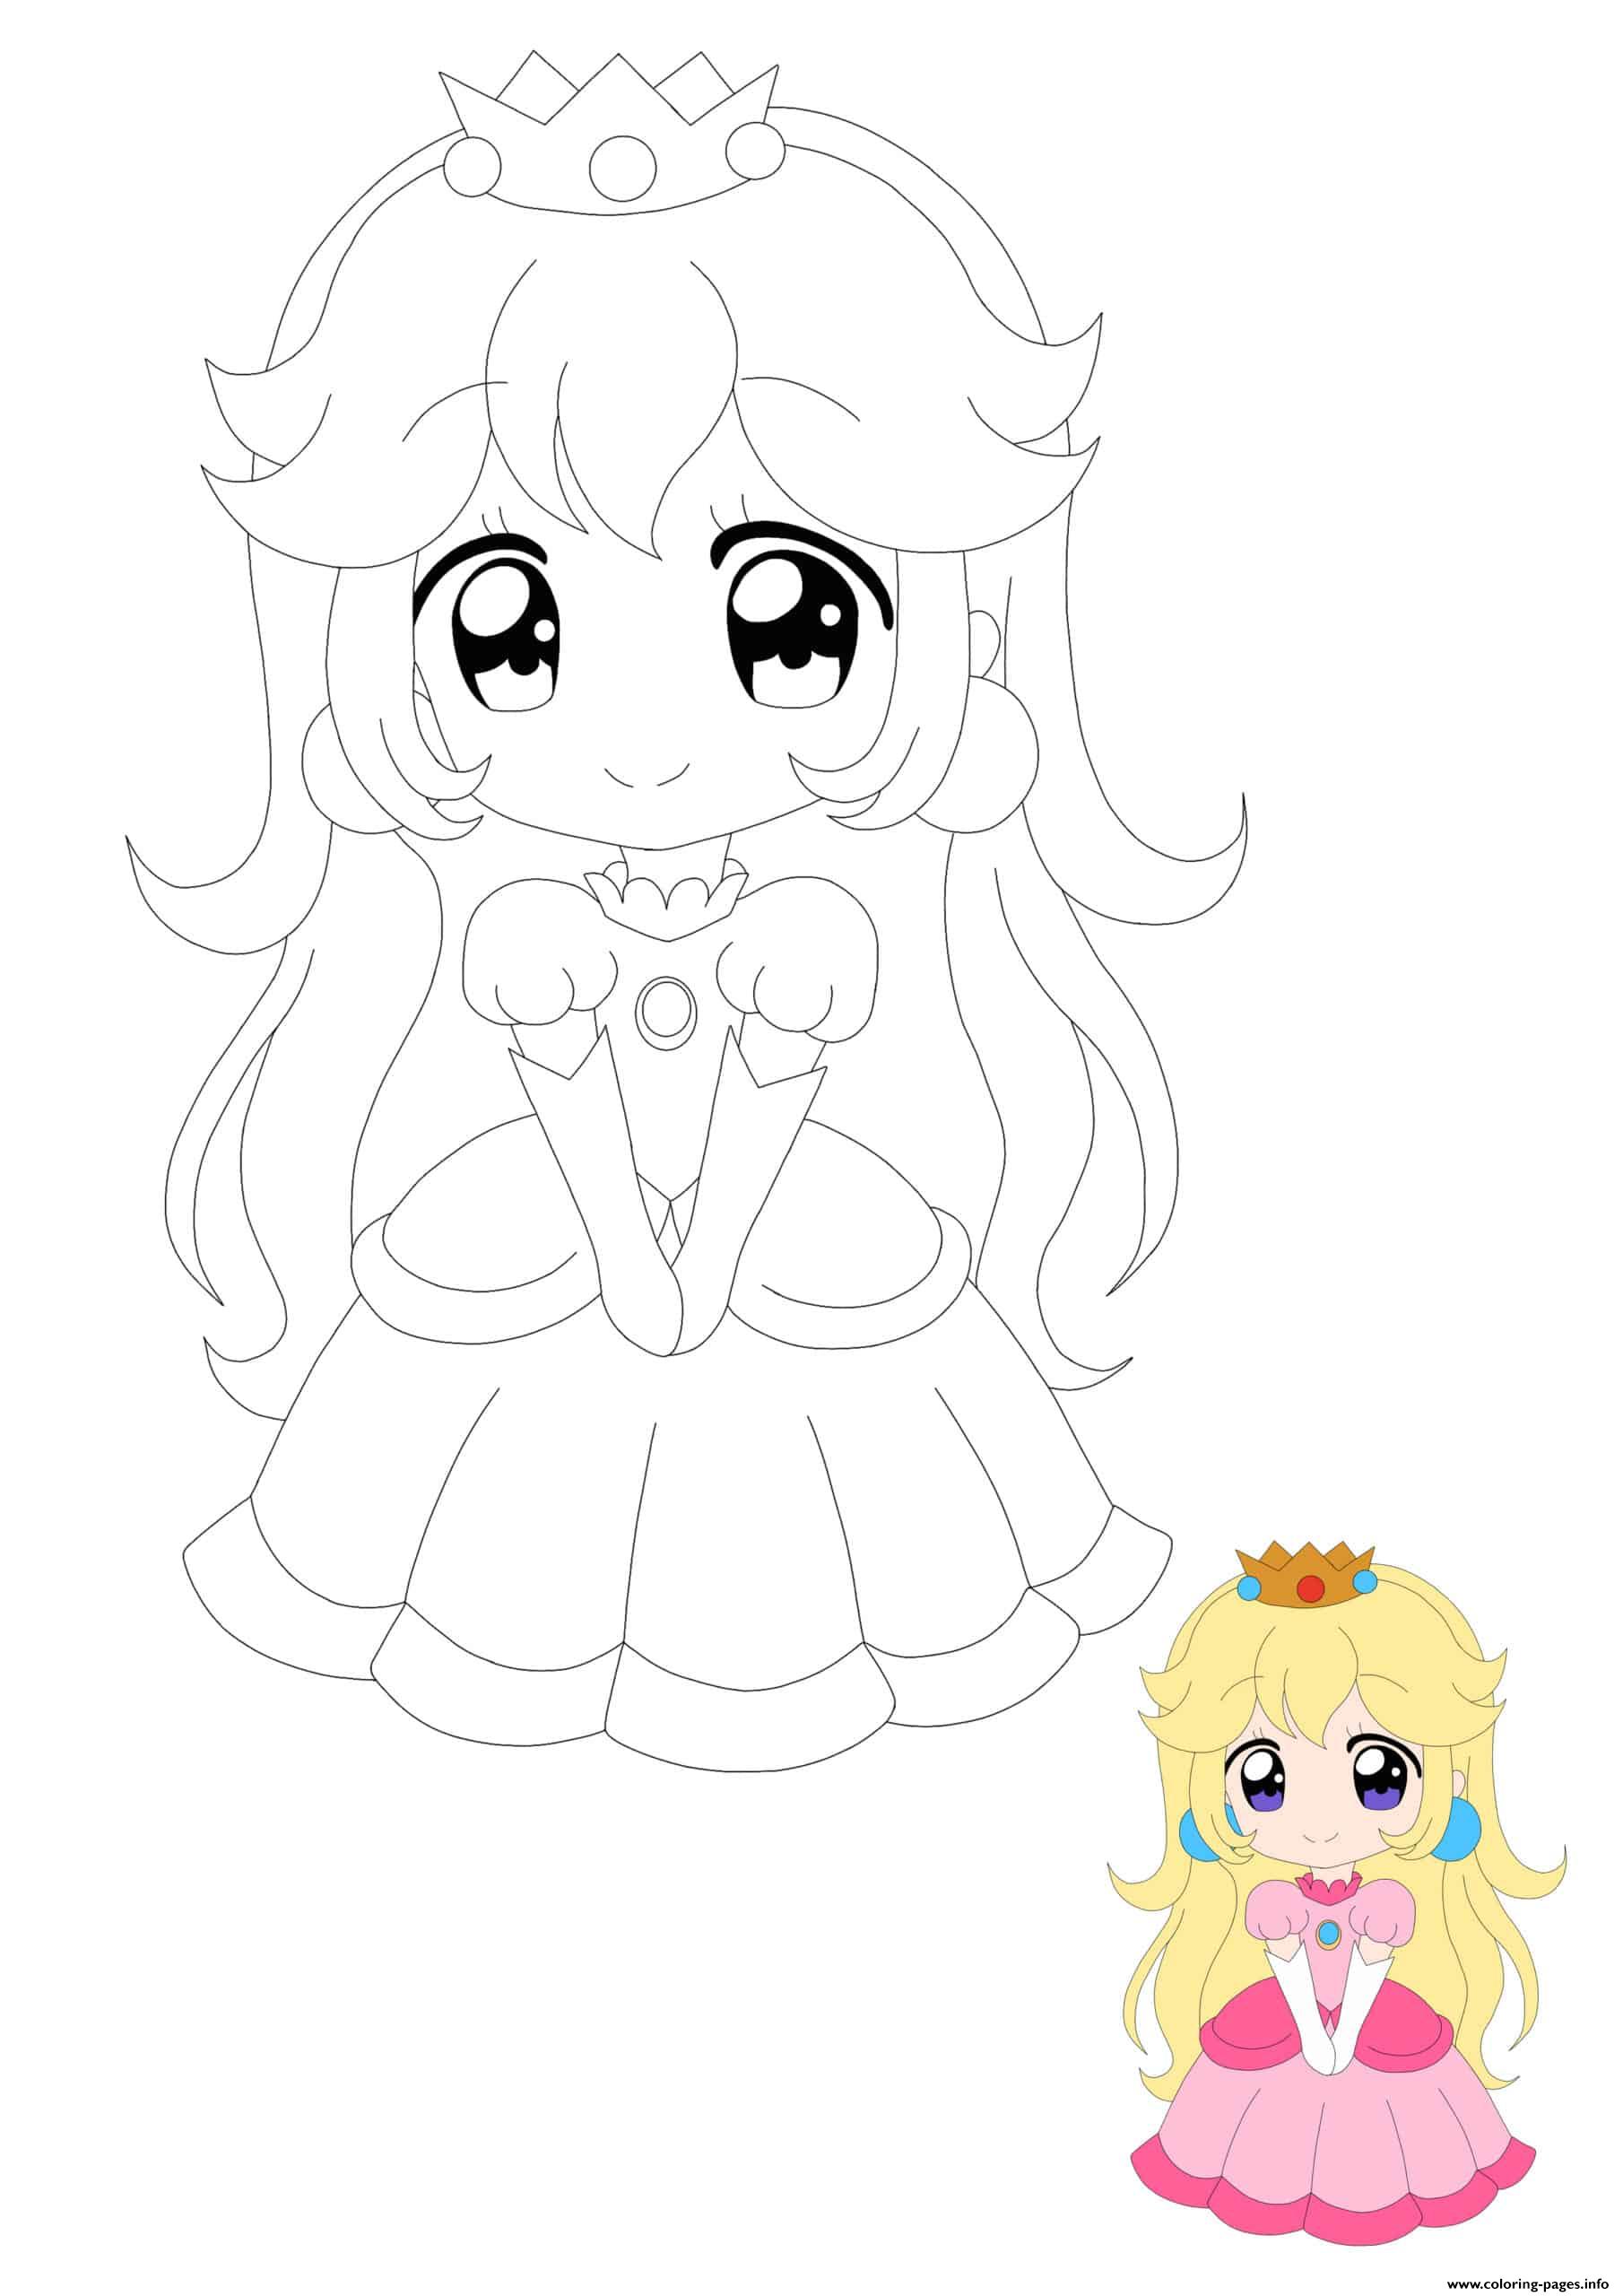 Princess Peach Printable Coloring Pages Get Your Hands On Amazing 